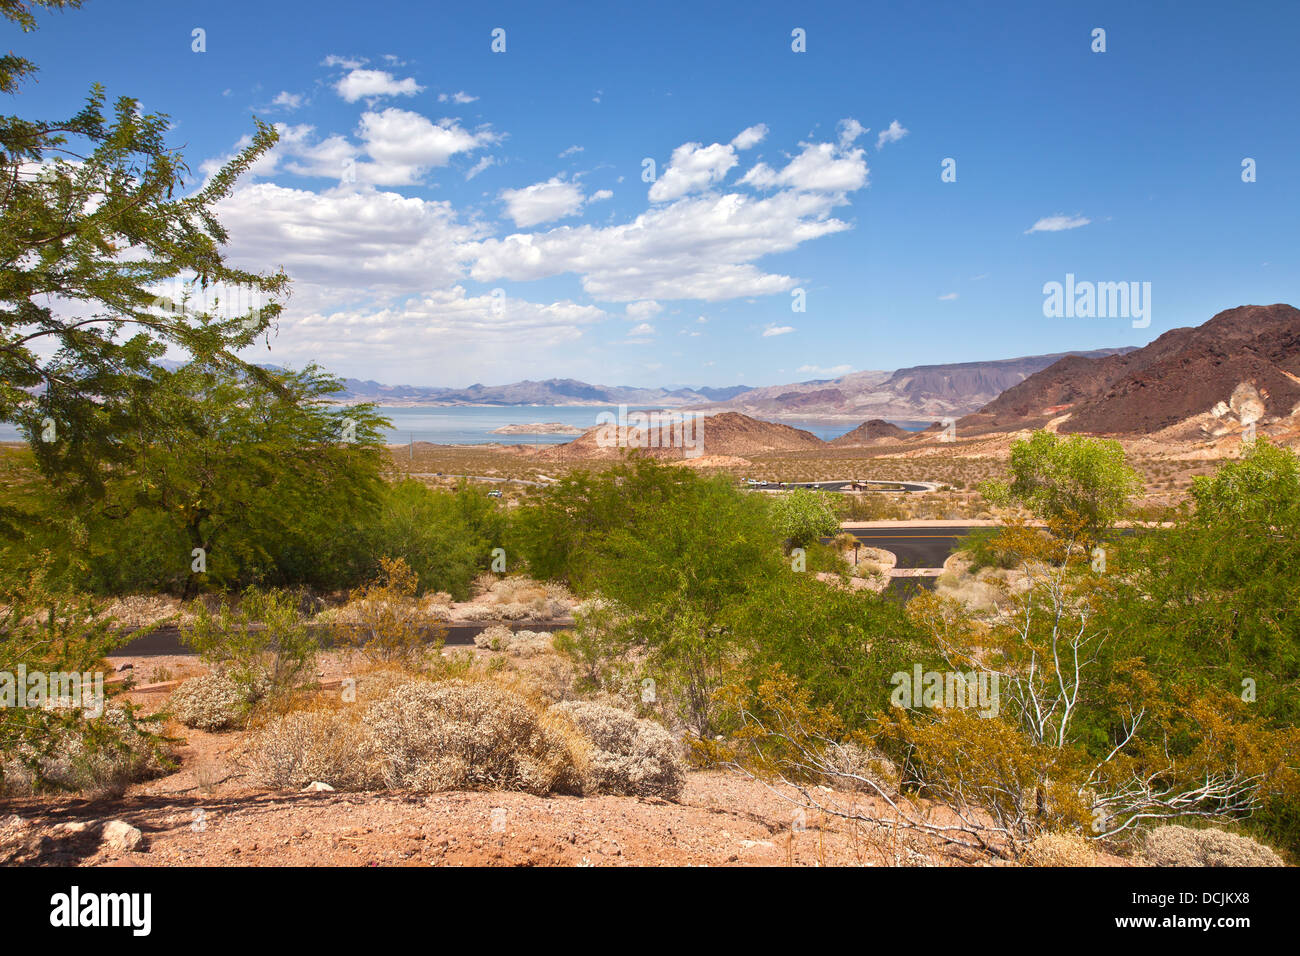 Lake Meade and a view of the surrounding landscape near Hoover Dam Nevada. Stock Photo